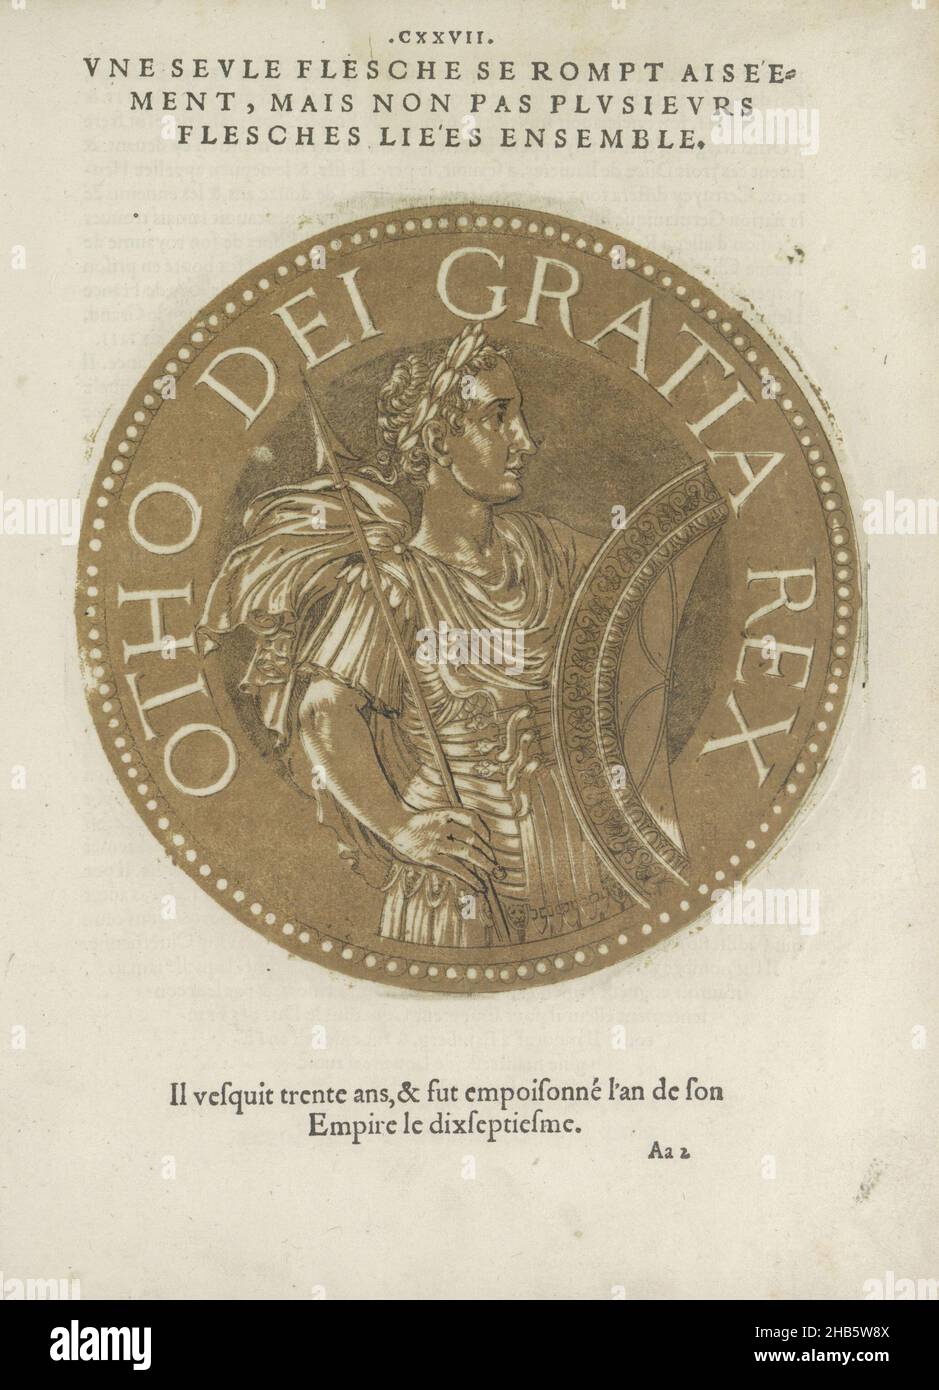 Portrait of Emperor Otto IIILes images presque de tous les empereurs (series title), Portrait of Emperor Otto III, on a coin with edge lettering. The print is part of a book on the emperors from Julius Caesar to Charles V and his brother Ferdinand., Joos Gietleughen, print maker: Hubert Goltzius, Antwerp, 1557 and/or 1559, paper, etching, letterpress printing, height 180 mm × width 179 mm Stock Photo